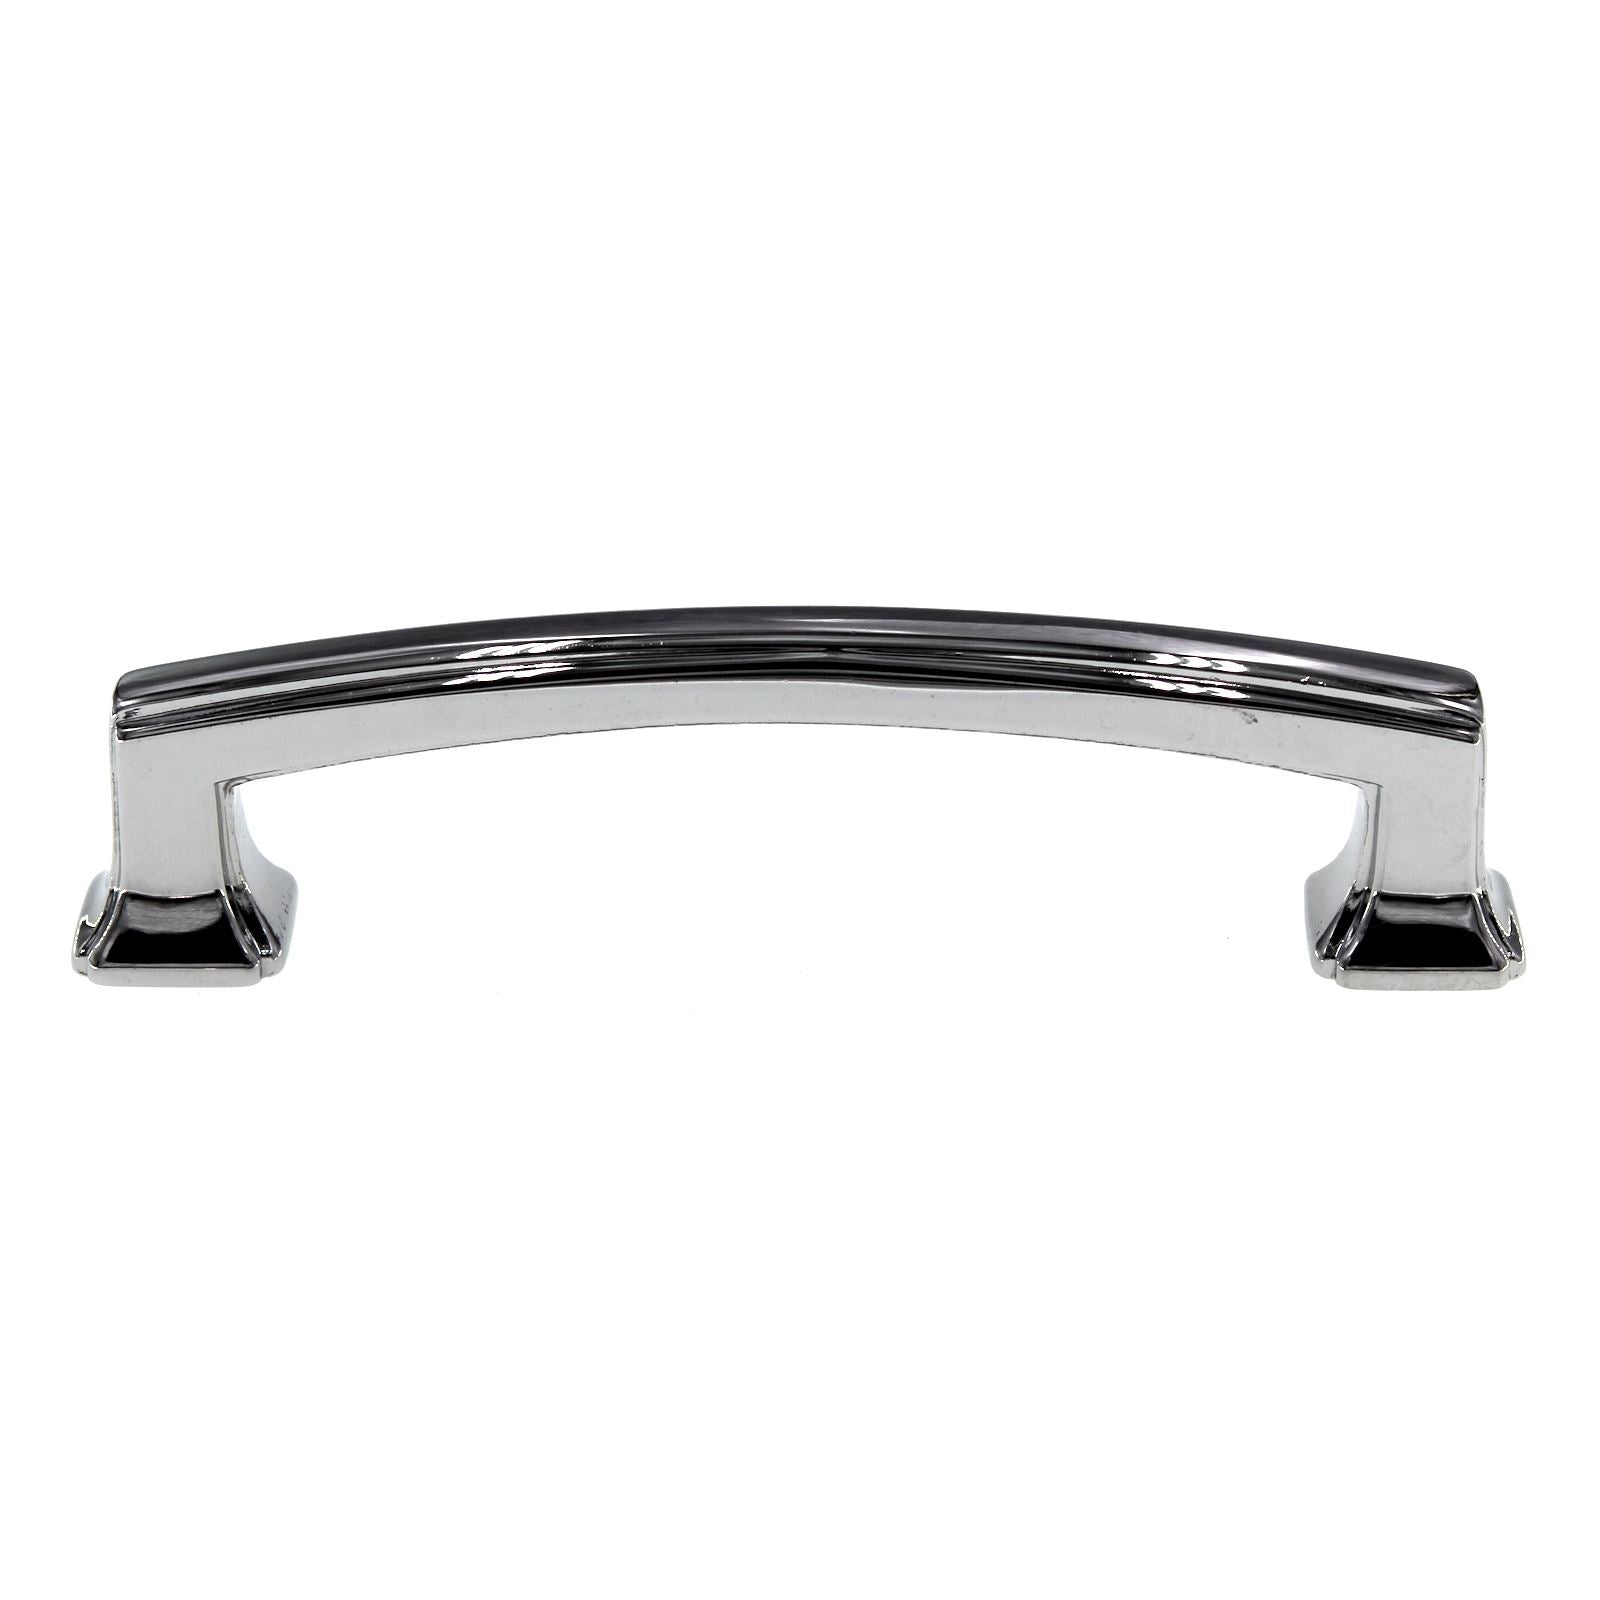 Hickory Hardware Bridges 3 3/4" (96mm) Ctr Cabinet Arch Pull Chrome P3232-CH